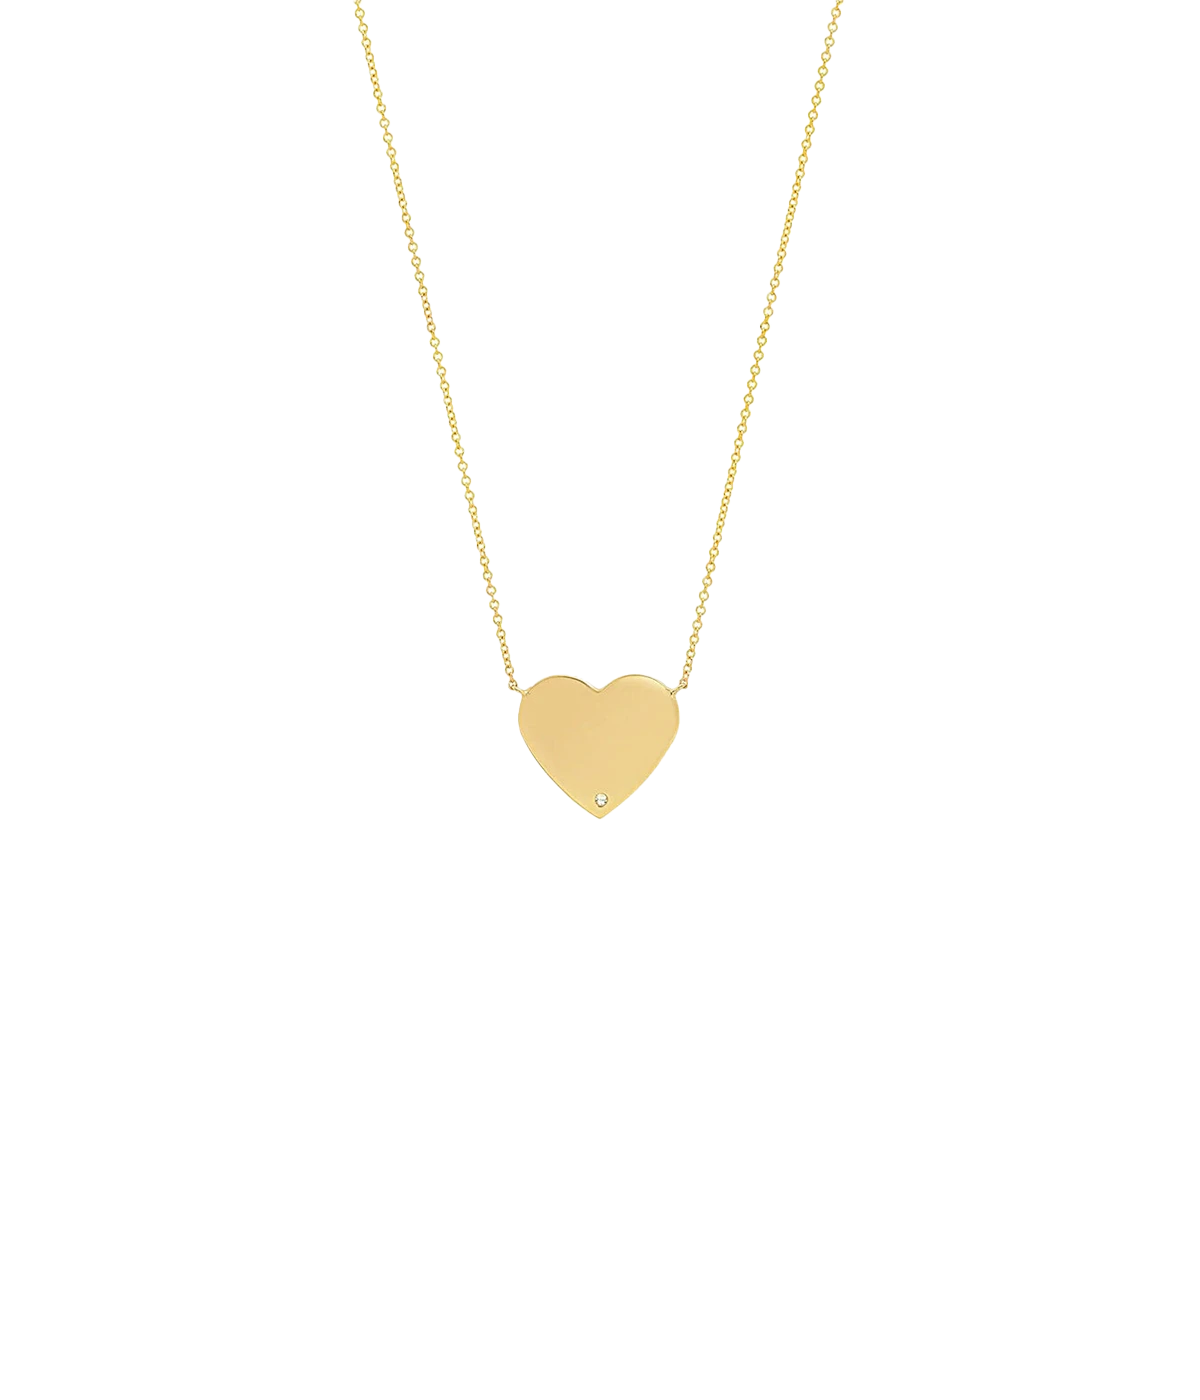 Single Diamond Heart Necklace in 14k Yellow Gold